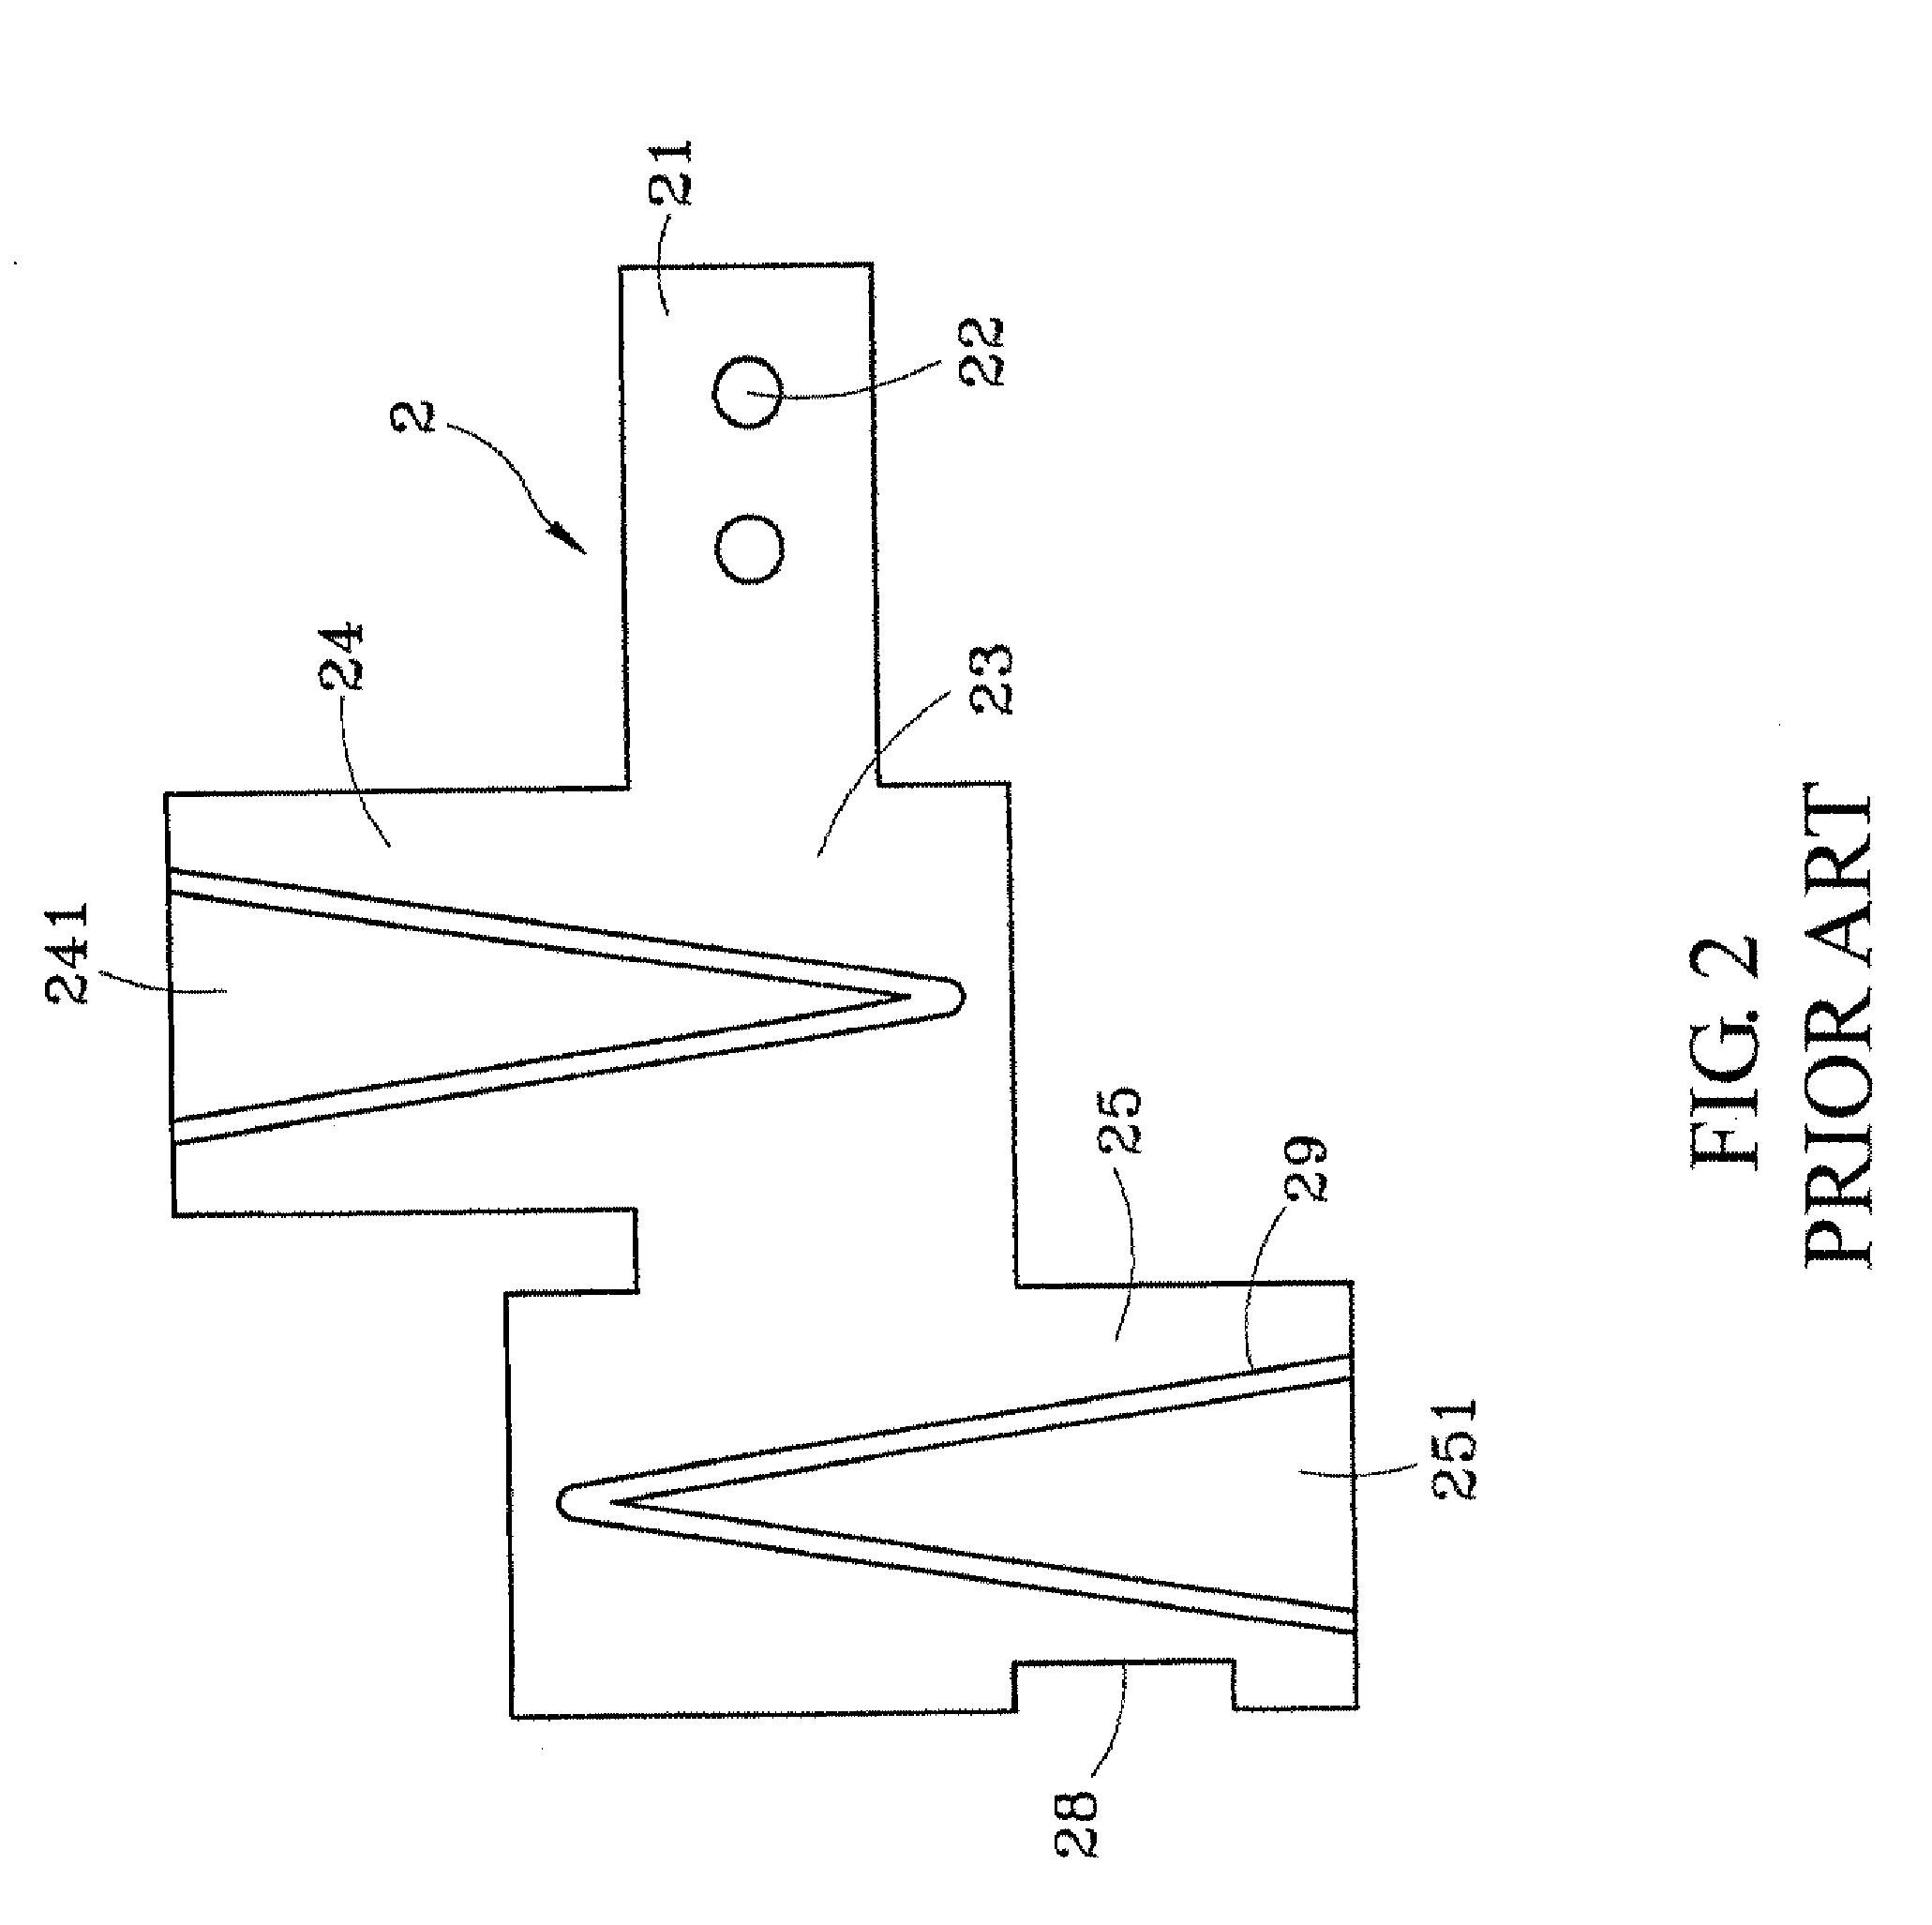 Method for Manufacturing Micro-Hinge Used in Electric Devices